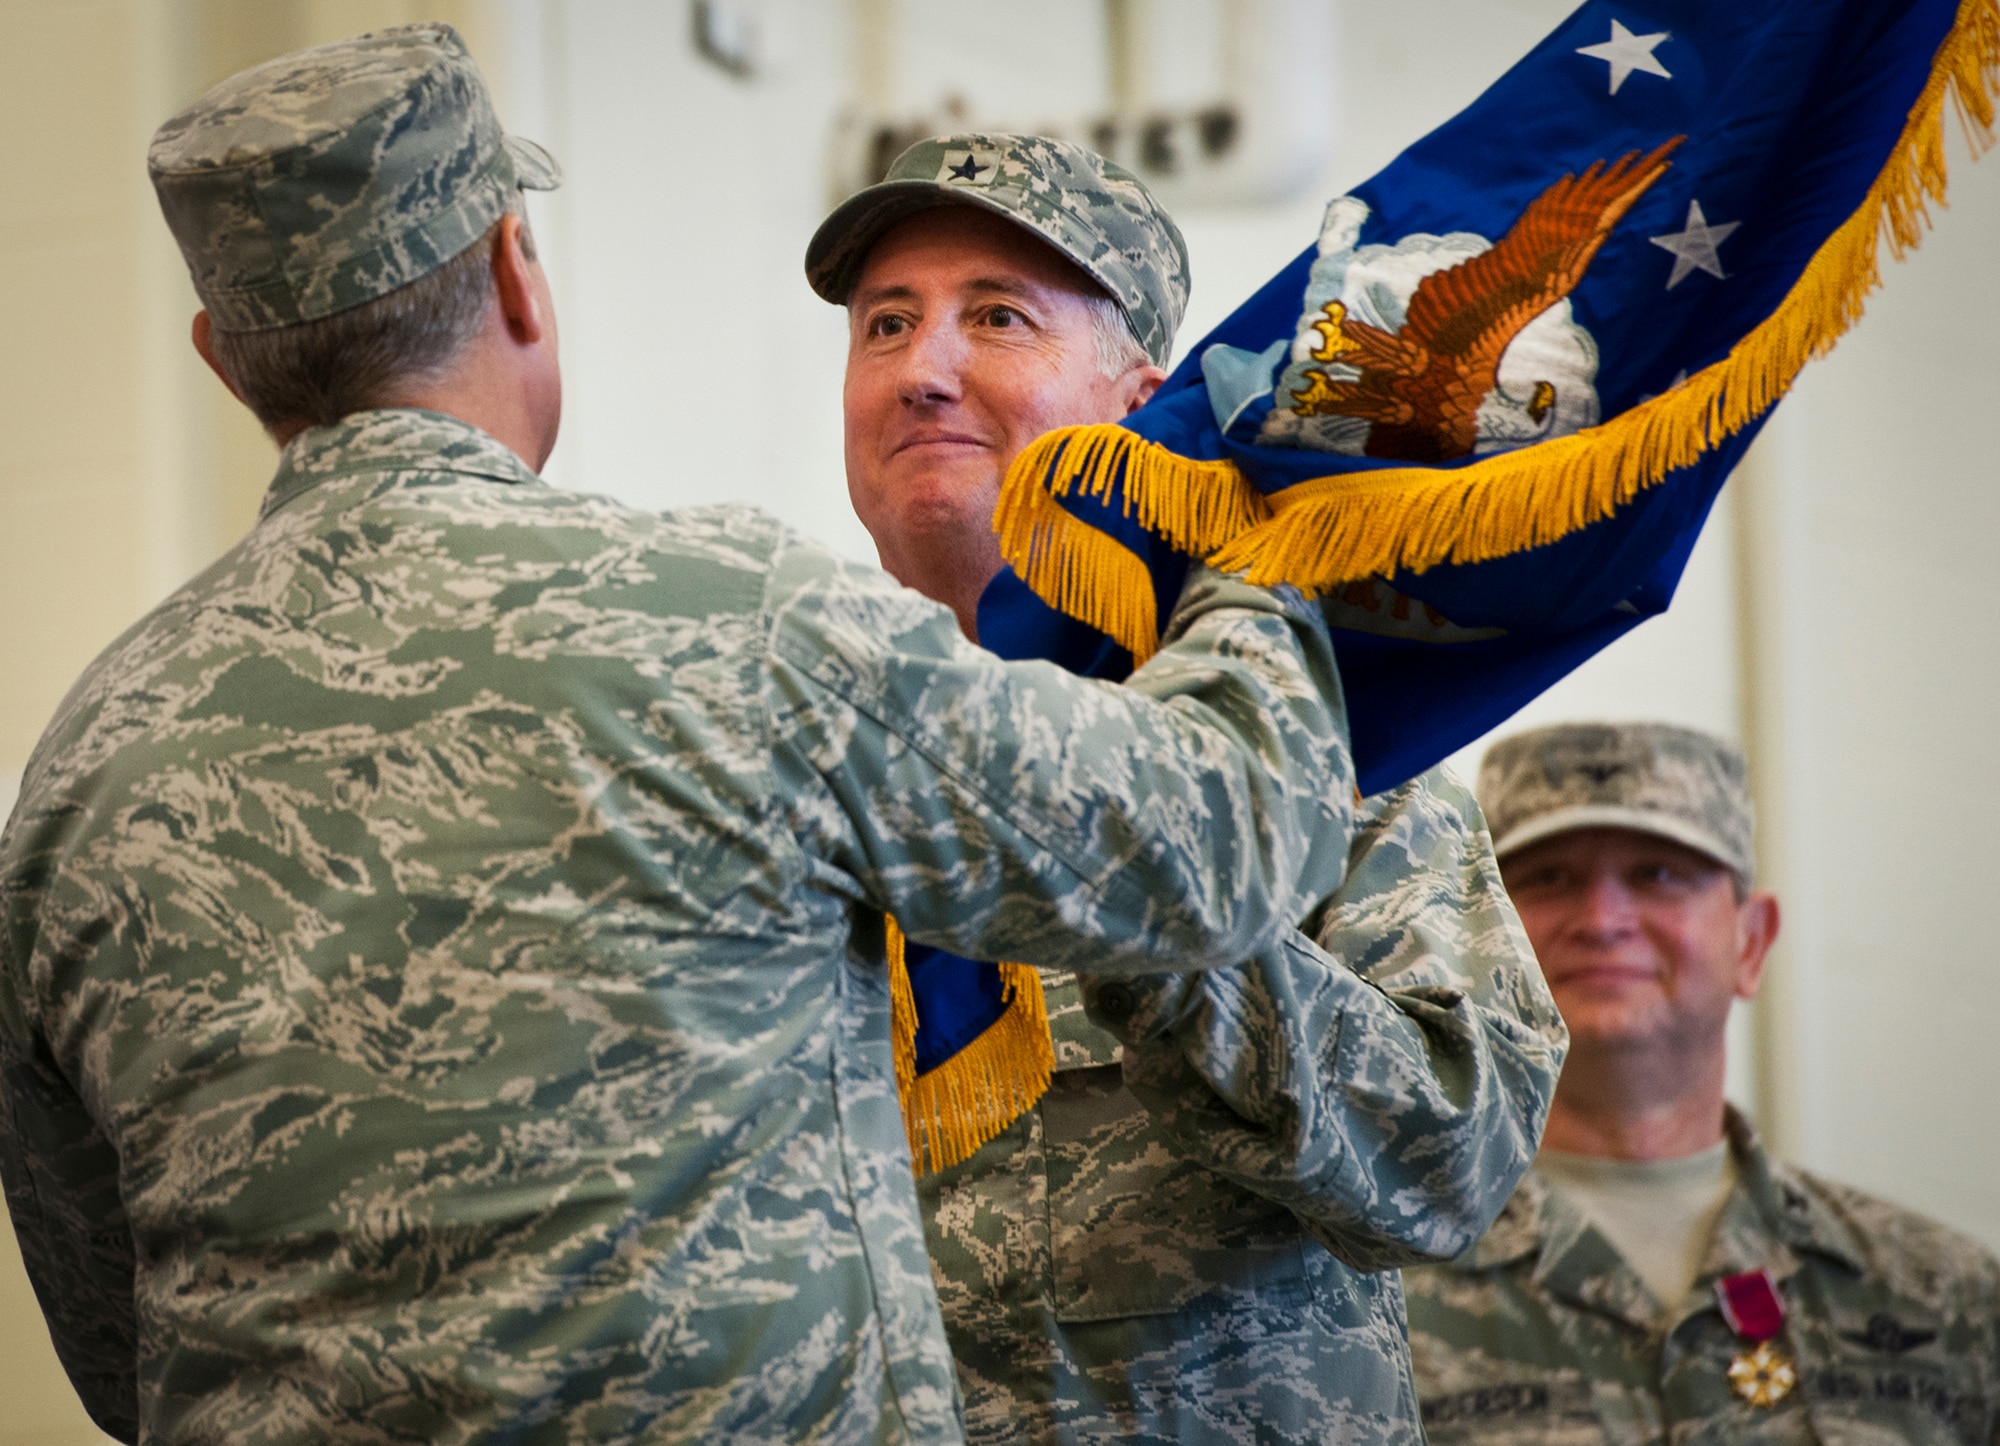 U.S. Air Force Brig. Gen. Jon Weeks, commander of Air Force Special Operations Air Warfare Center, right, takes the AFSOAWC flag from Lt. Gen. Eric Fiel, commander of Air Force Special Operations Command, left, during a ceremony held on Duke Field, Fla., Feb. 11, 2013. The ceremony was held for the deactivation of the Air Force Special Operations Training Center and the activation and assumption of command of the AFSOAWC. (U.S. Air Force photo/Samuel King)